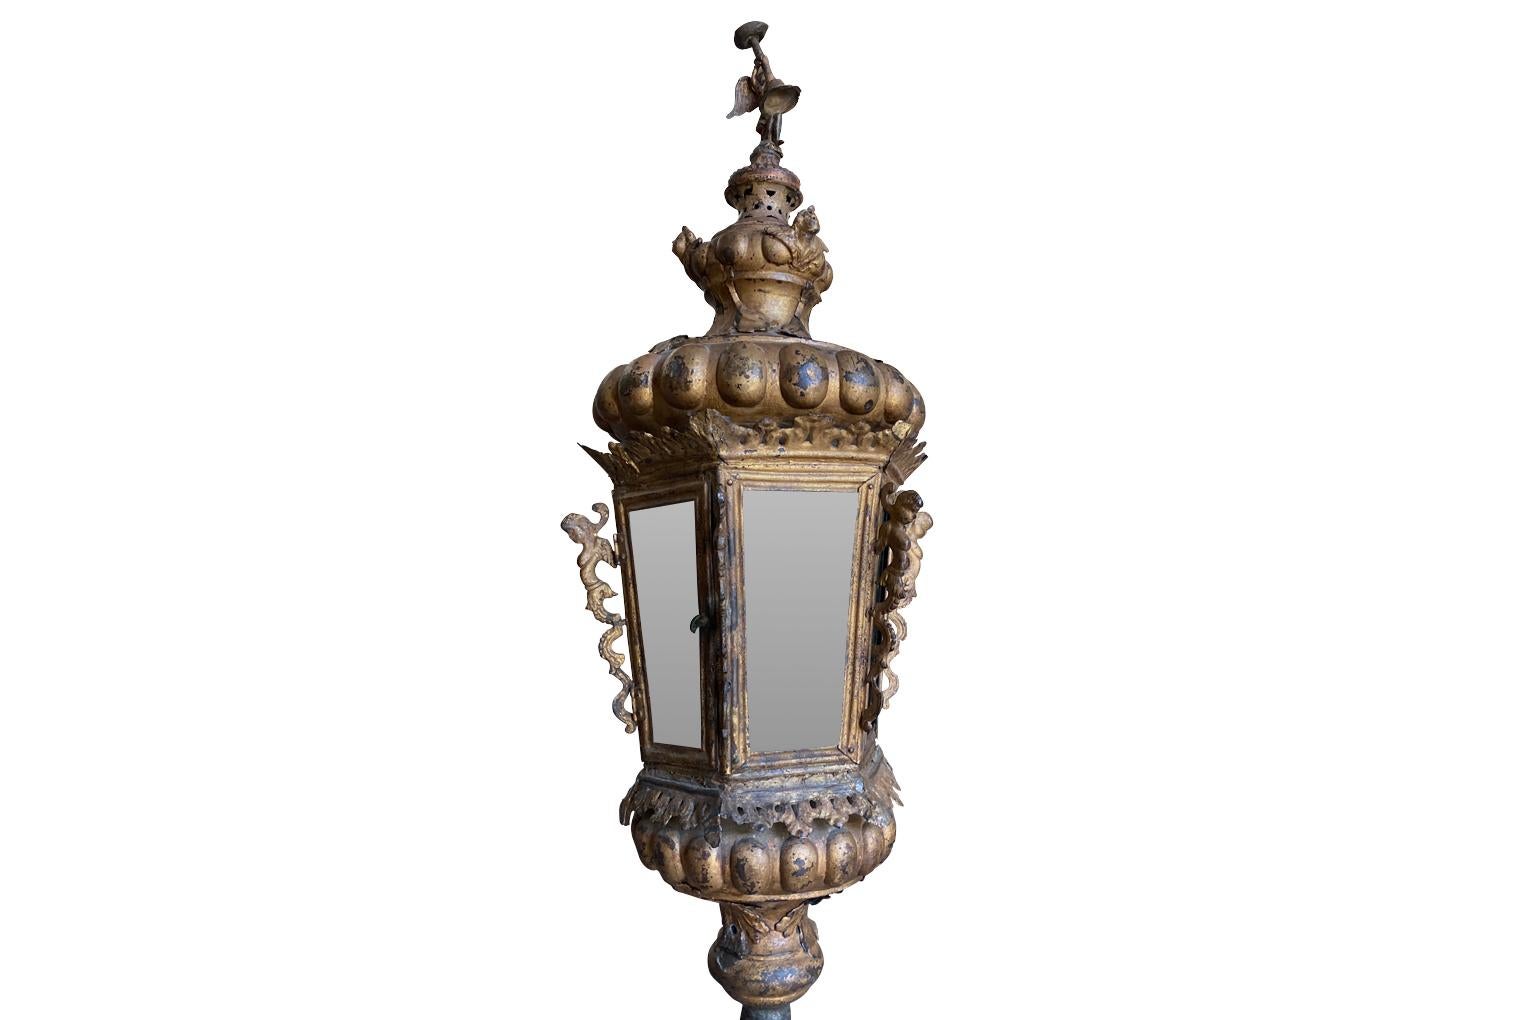 A very stunning 18th century Lantern from Venice. Wonderfully crafted from gilt metal and decorated with an angel and putti - standing in its stone base. Grand scale and ready to use with candles or be electrified.